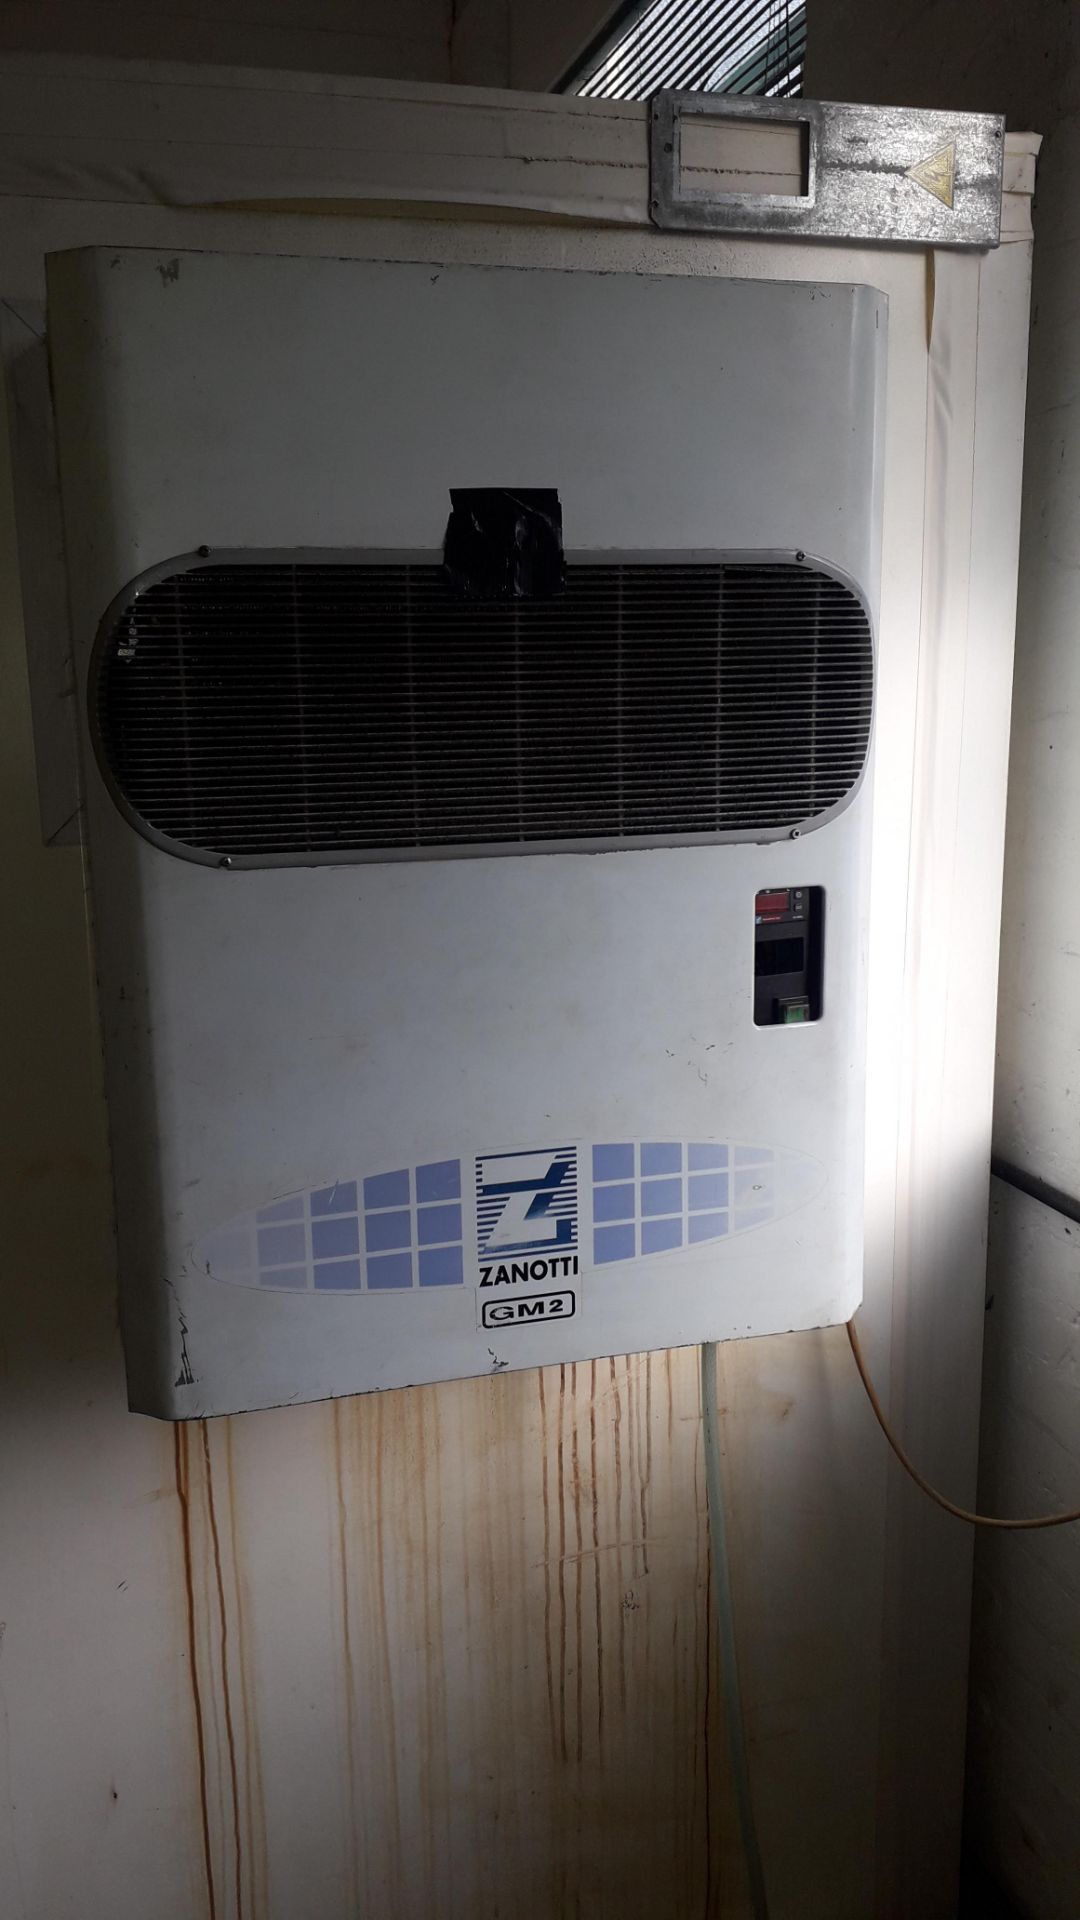 Walk In Cold Room 2400 x 2400 x 2200(H) with Zanotti GM2 Monoblock Chiller Unit 240v – Buyer to - Image 3 of 8